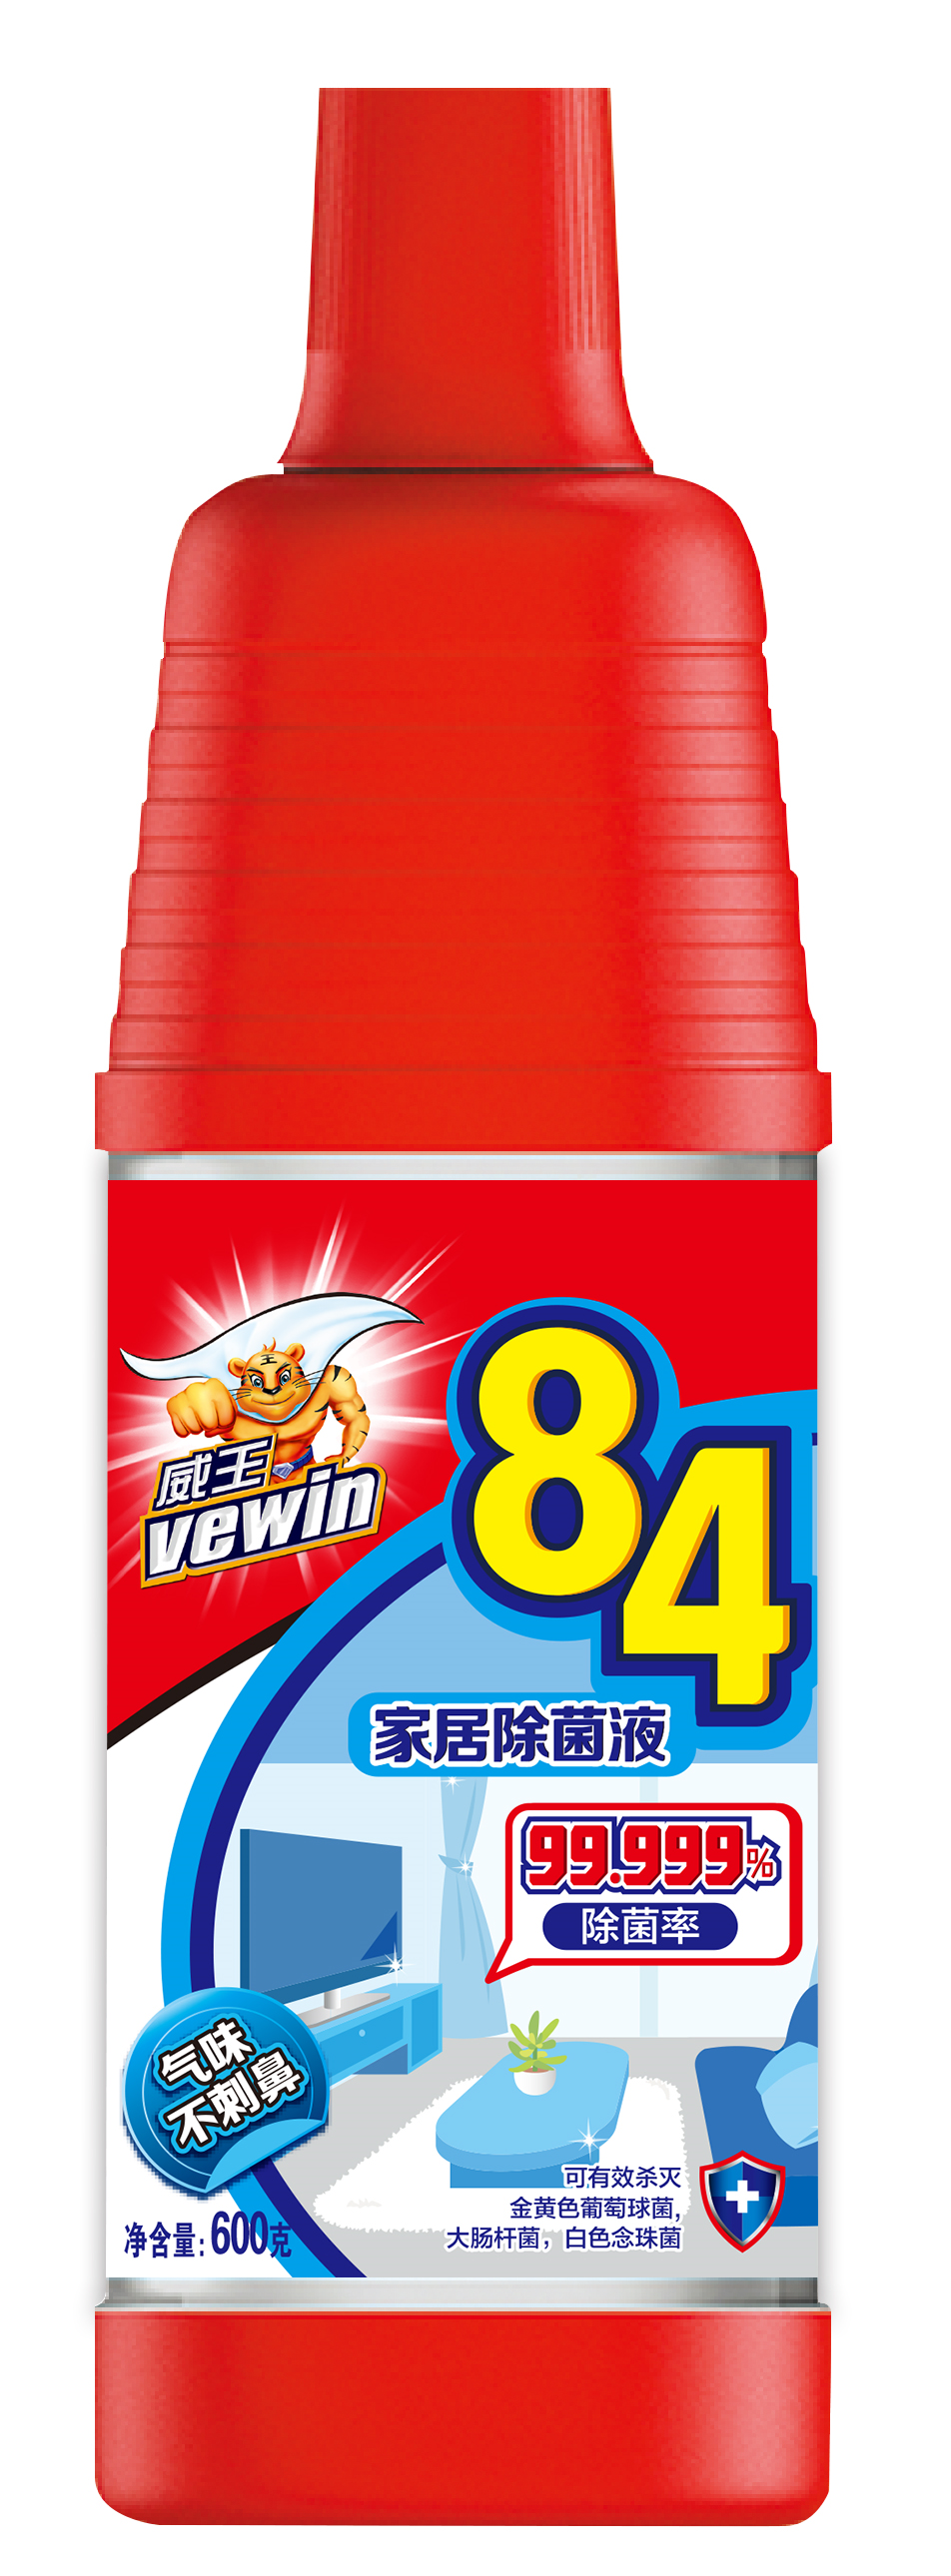 Vewin 84 Household Disinfectant 